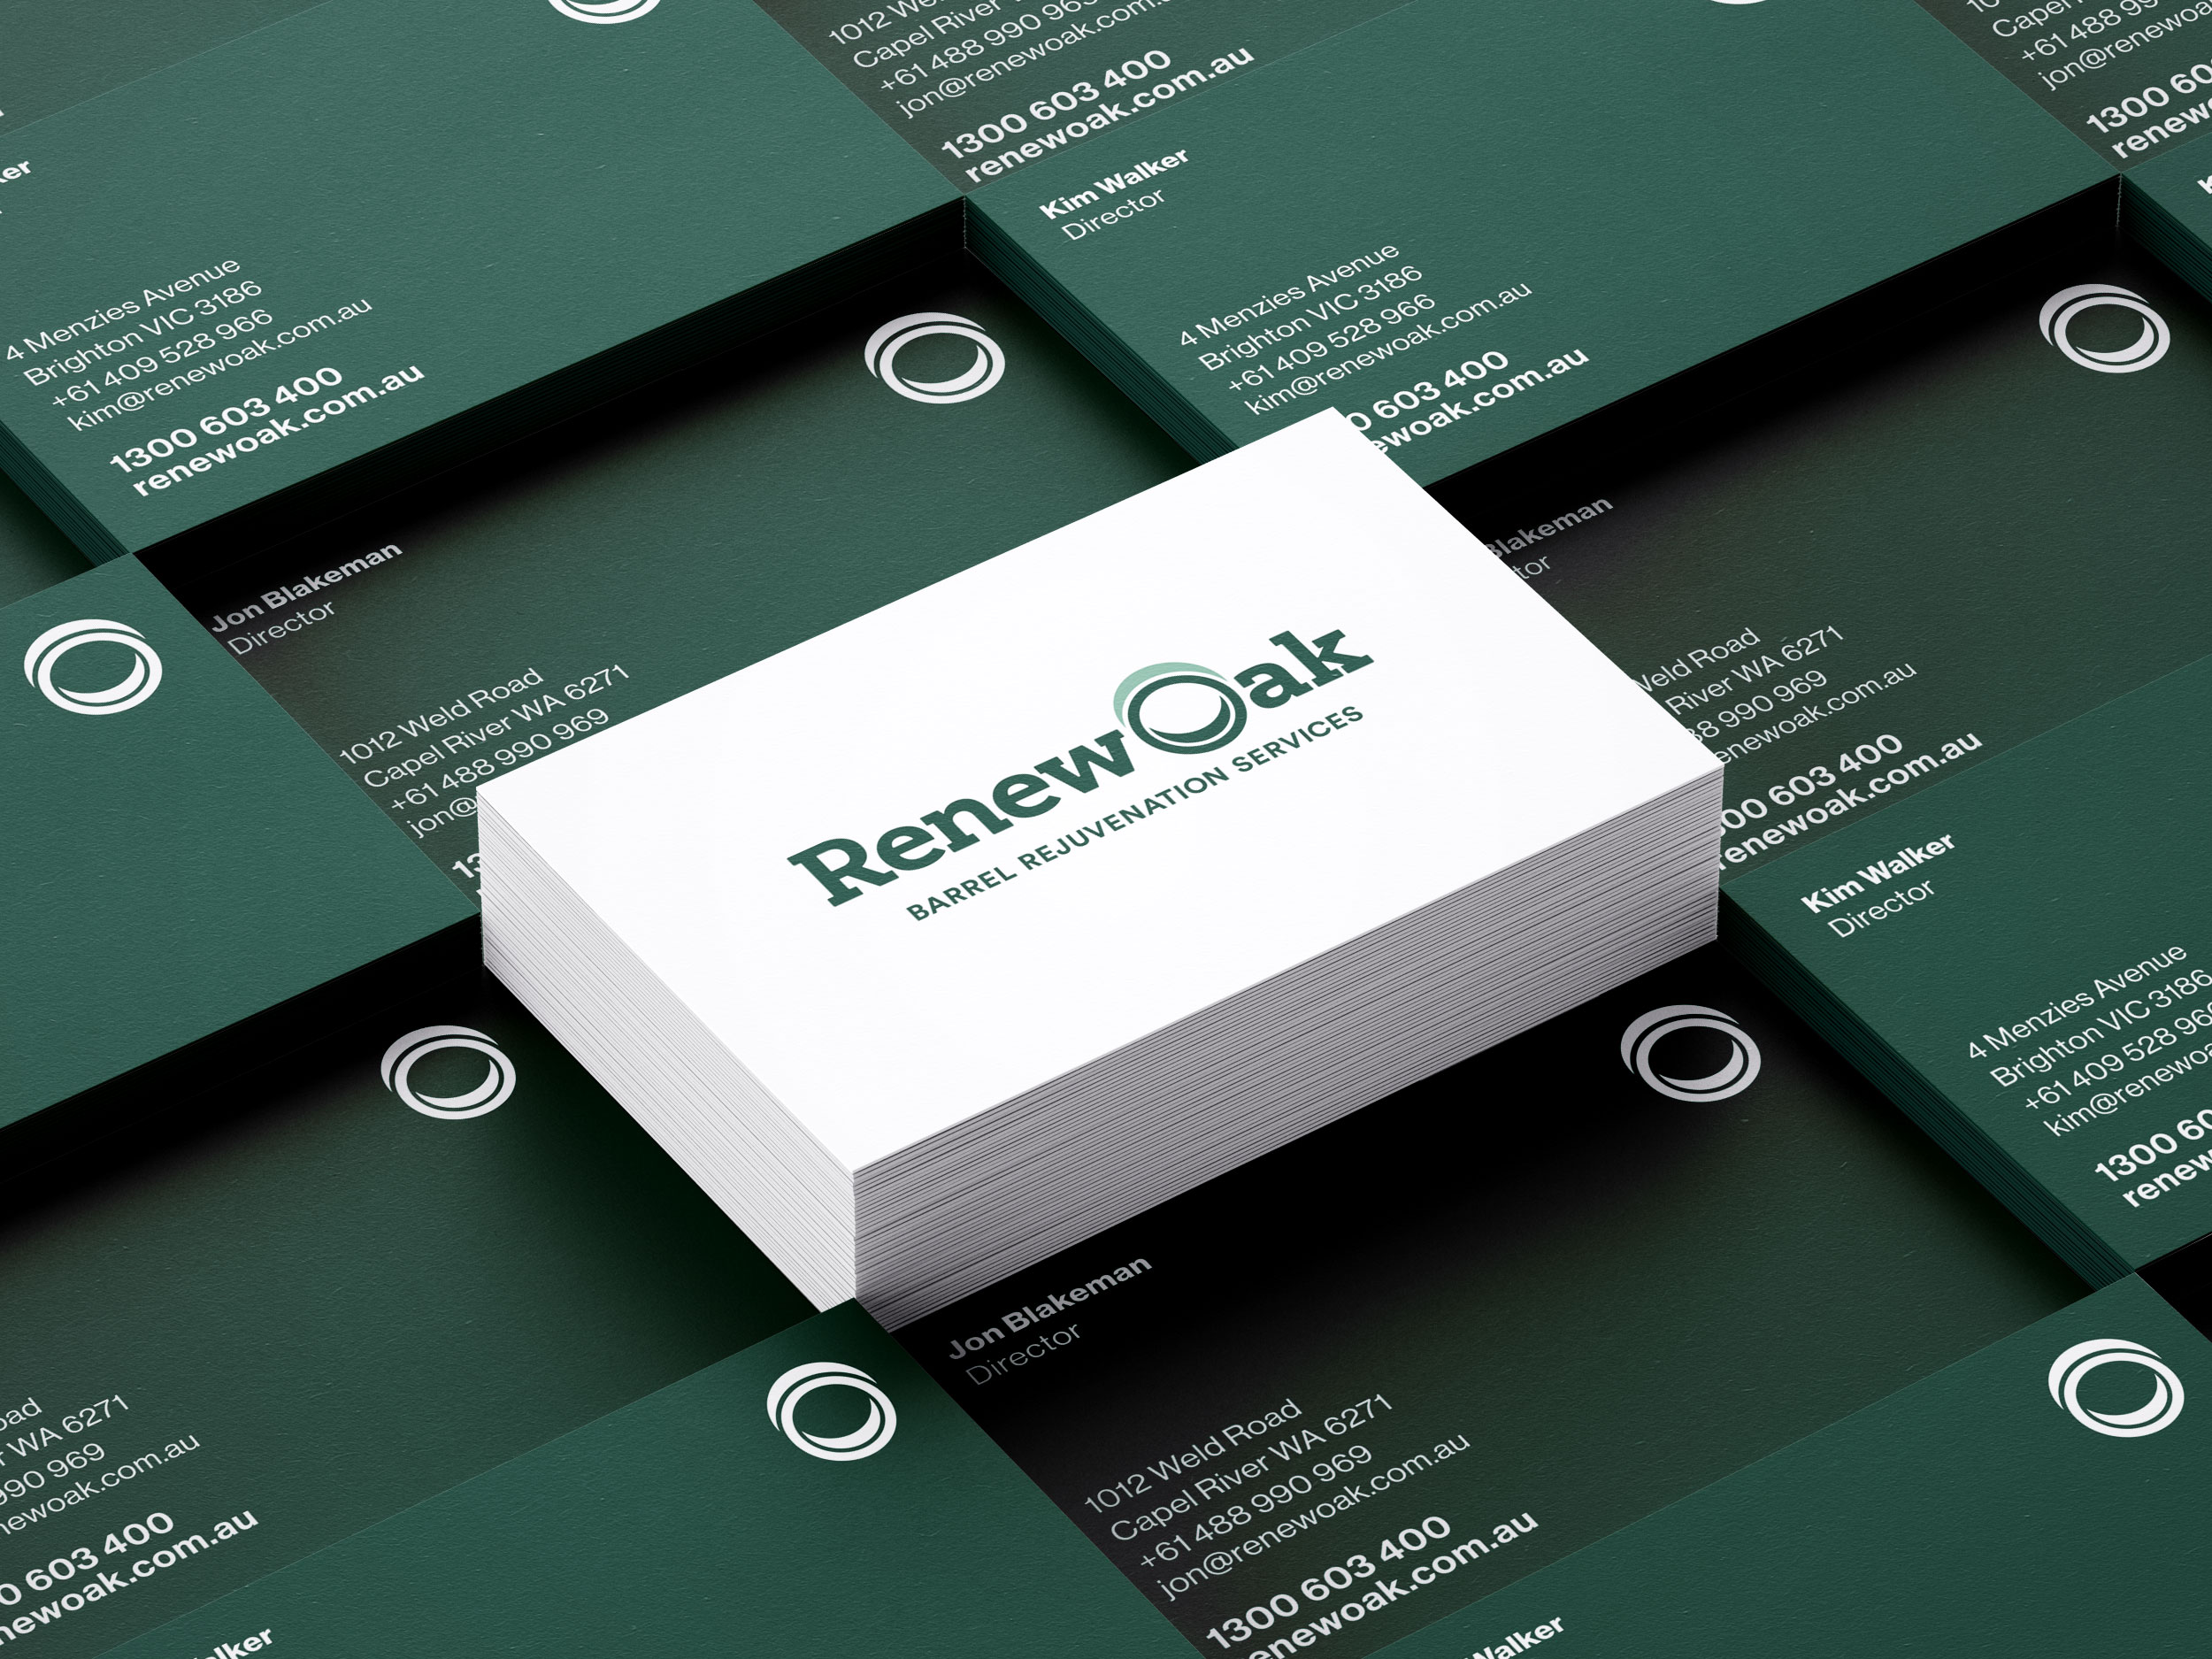 Renew Oak Business card design back and front